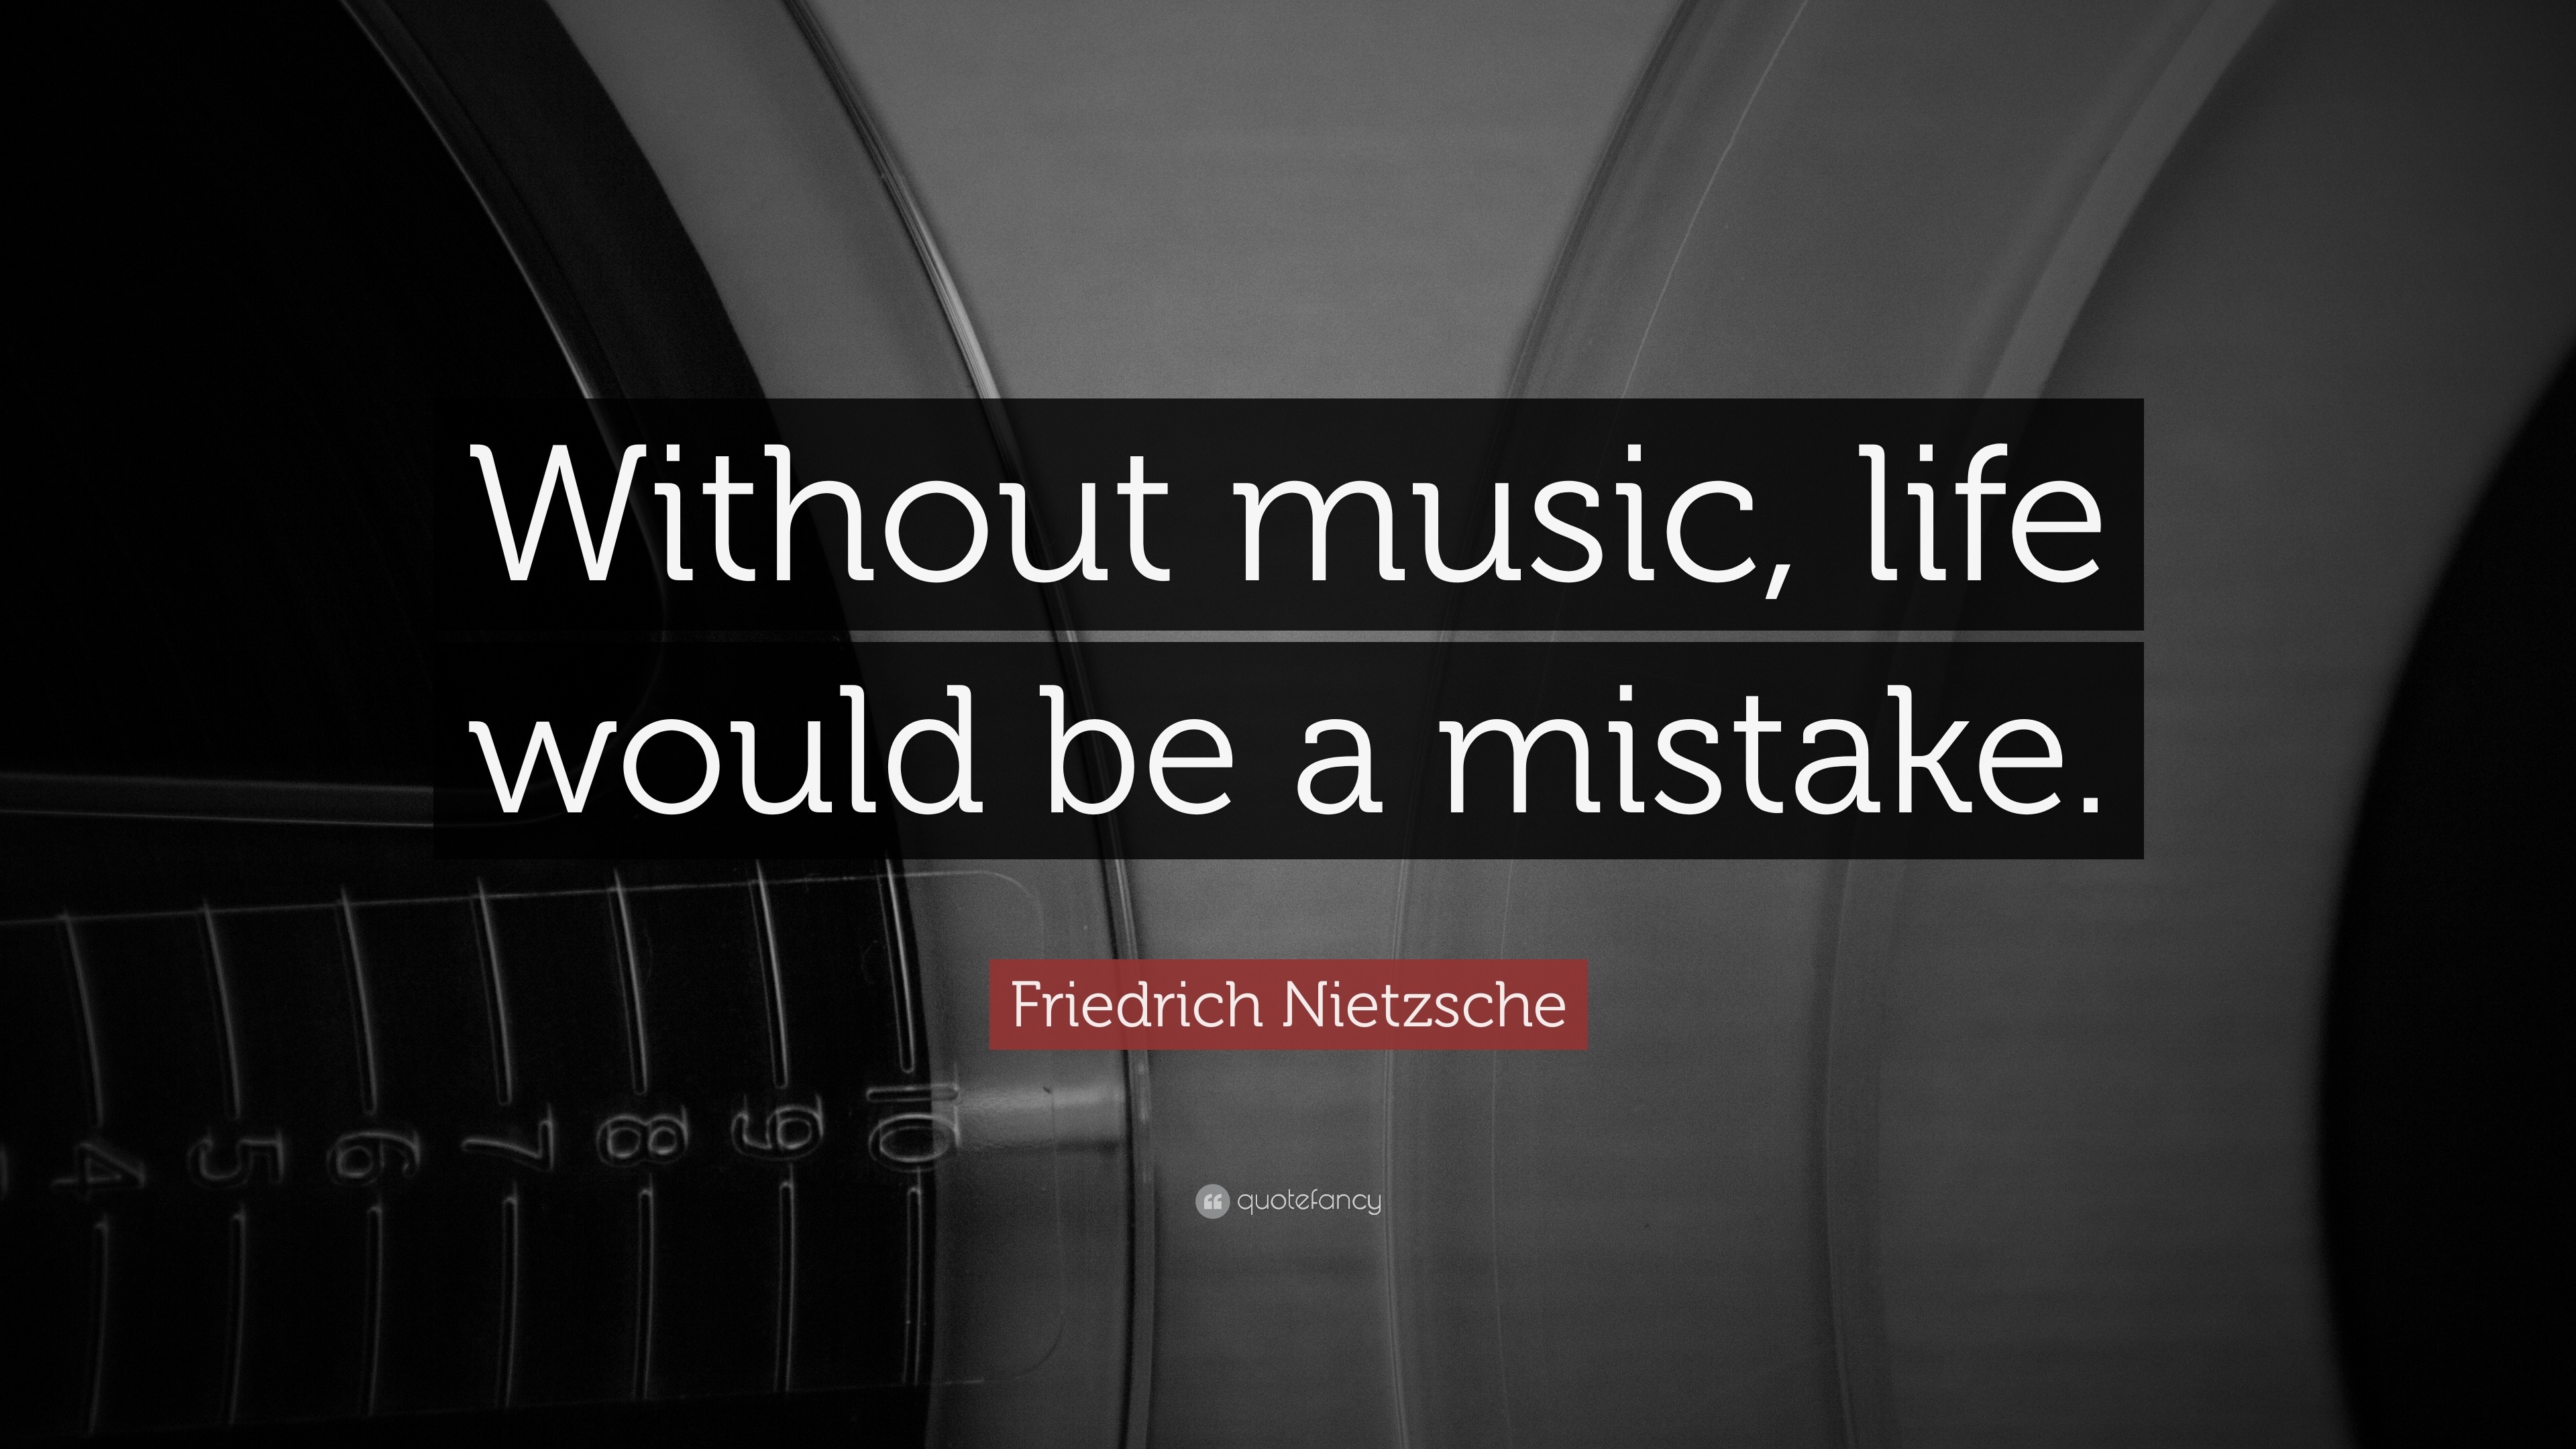 Friedrich Nietzsche Quote “Without music life would be a mistake ”